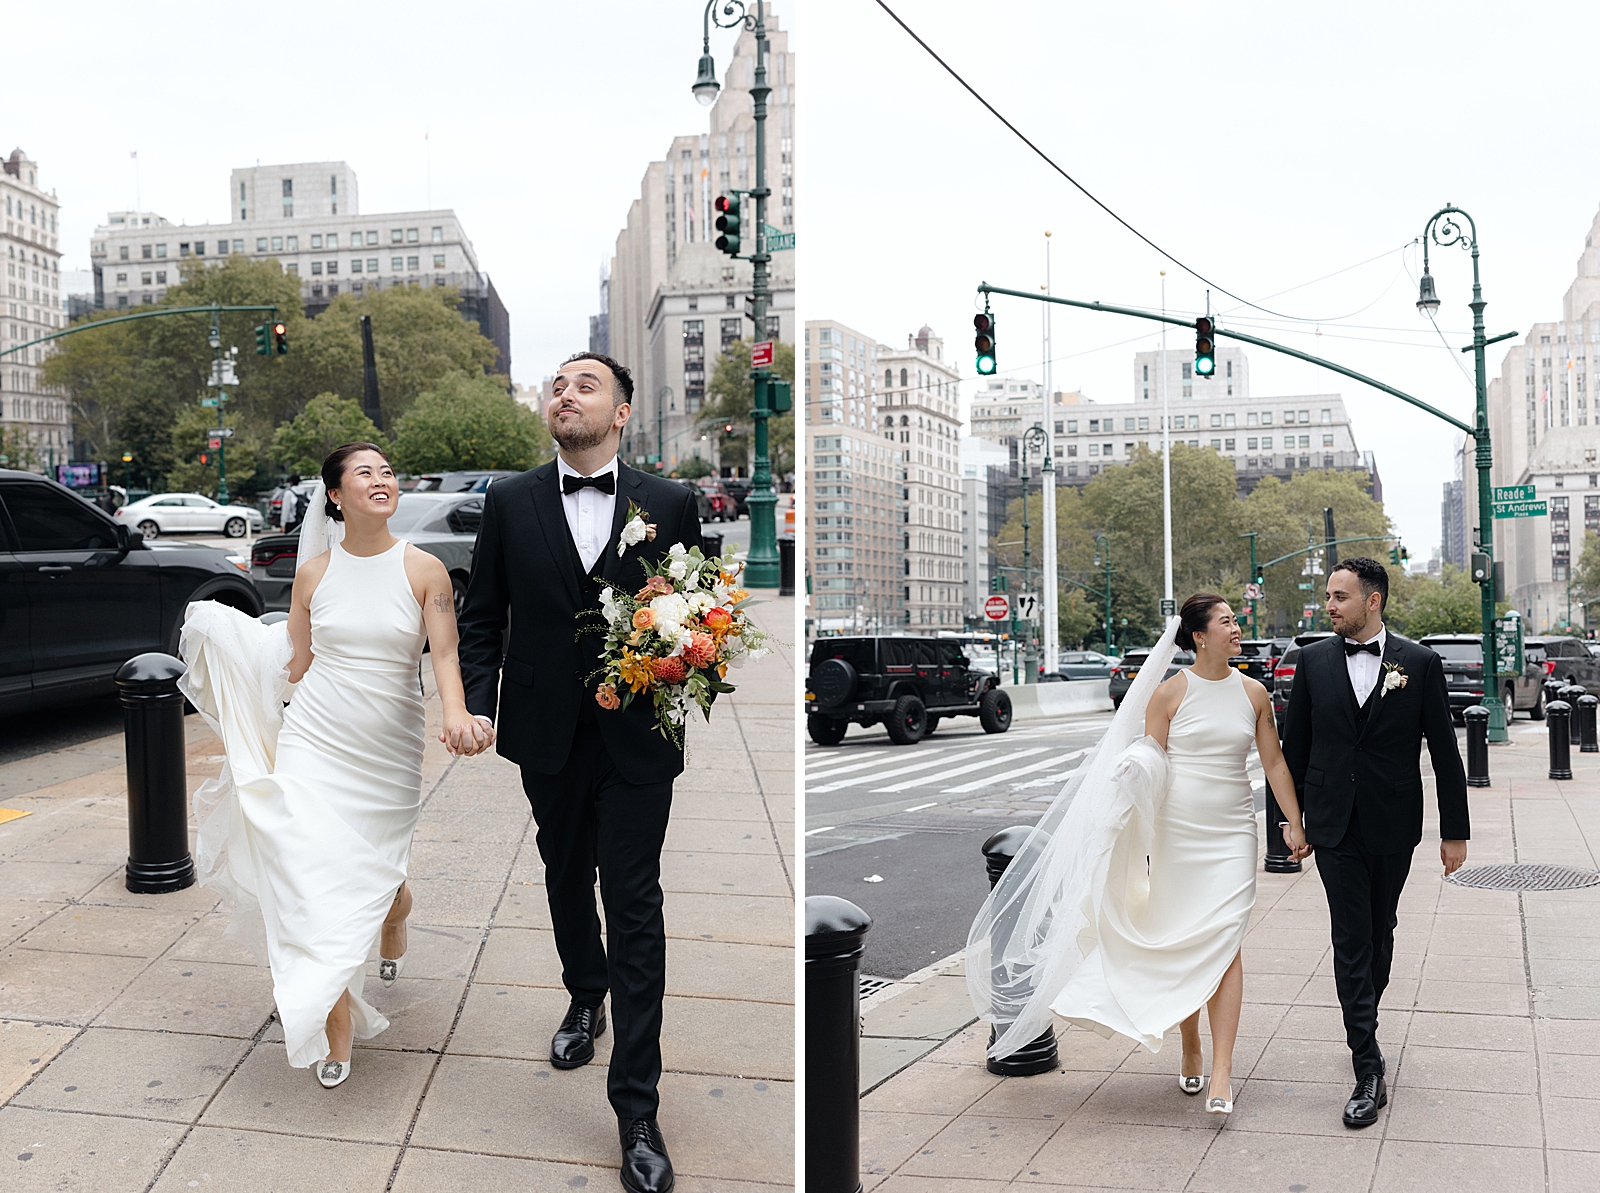 Left photo: Shot of the bride and groom holding hands as they walk down the city streets.
Right photo: Shot of the bride and groom holding hands and smiling at each other as they walk down the city streets. 
